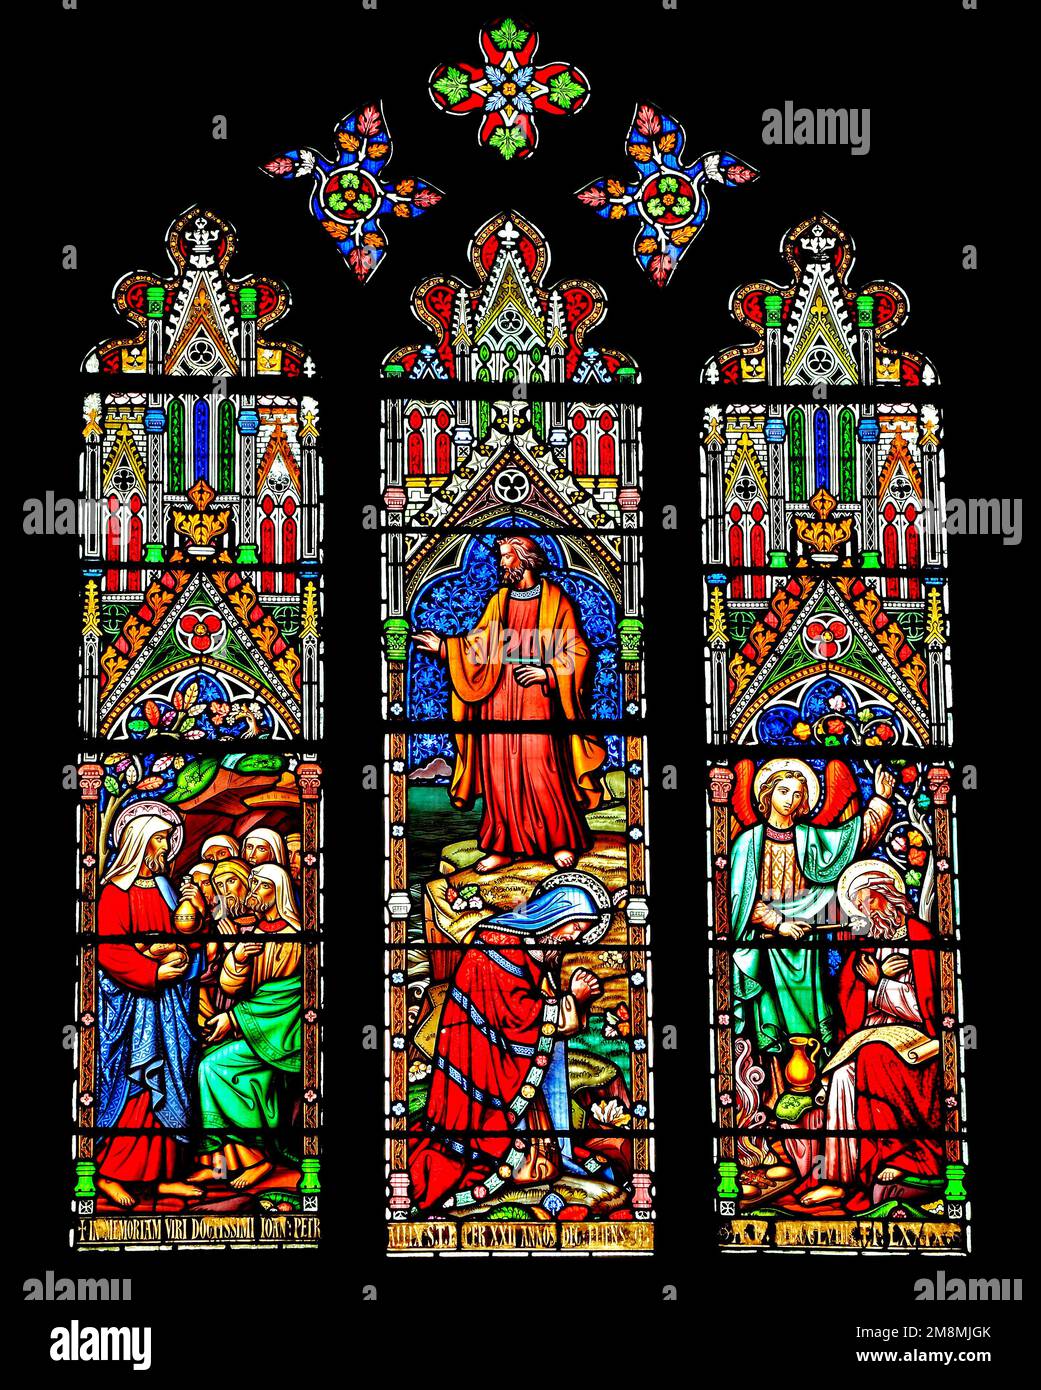 Stained glass window, Obadiah brings bread, Elijah with servant and Elijah with angel, by William Wailes, mid 19th century, Ely Cathedral Stock Photo